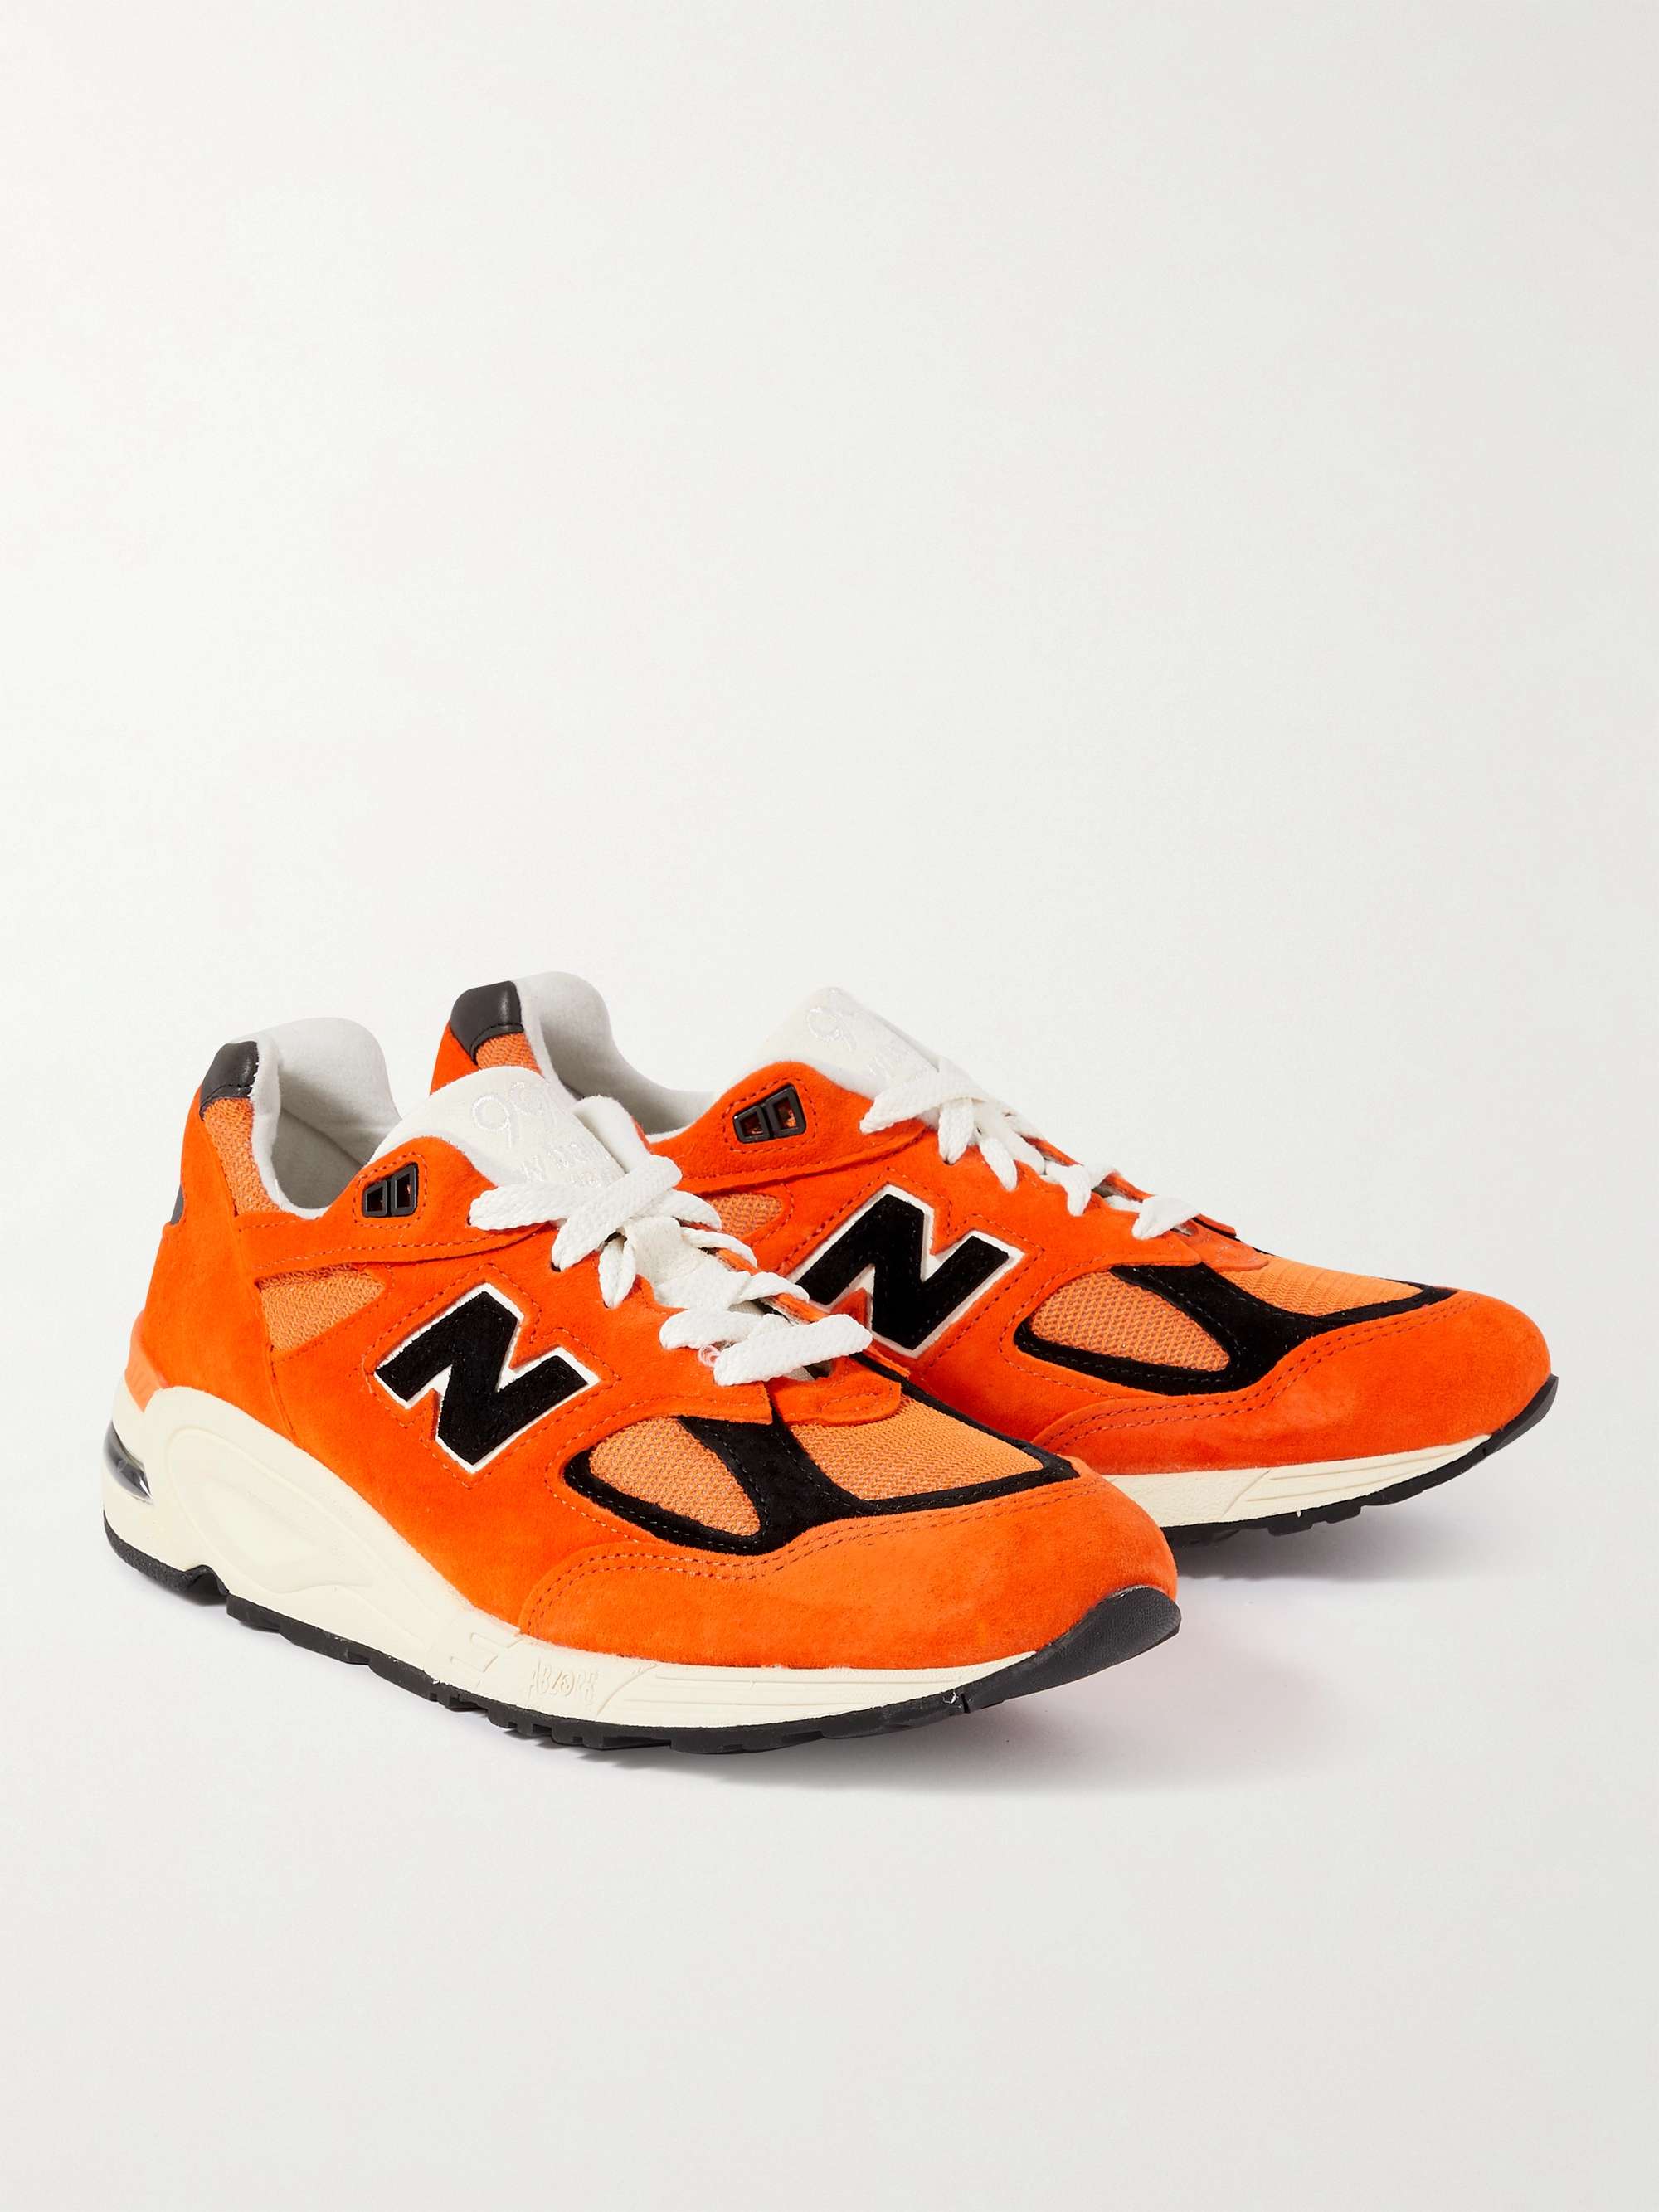 NEW BALANCE MADE in USA 990v2 Mesh and Suede Sneakers | MR PORTER